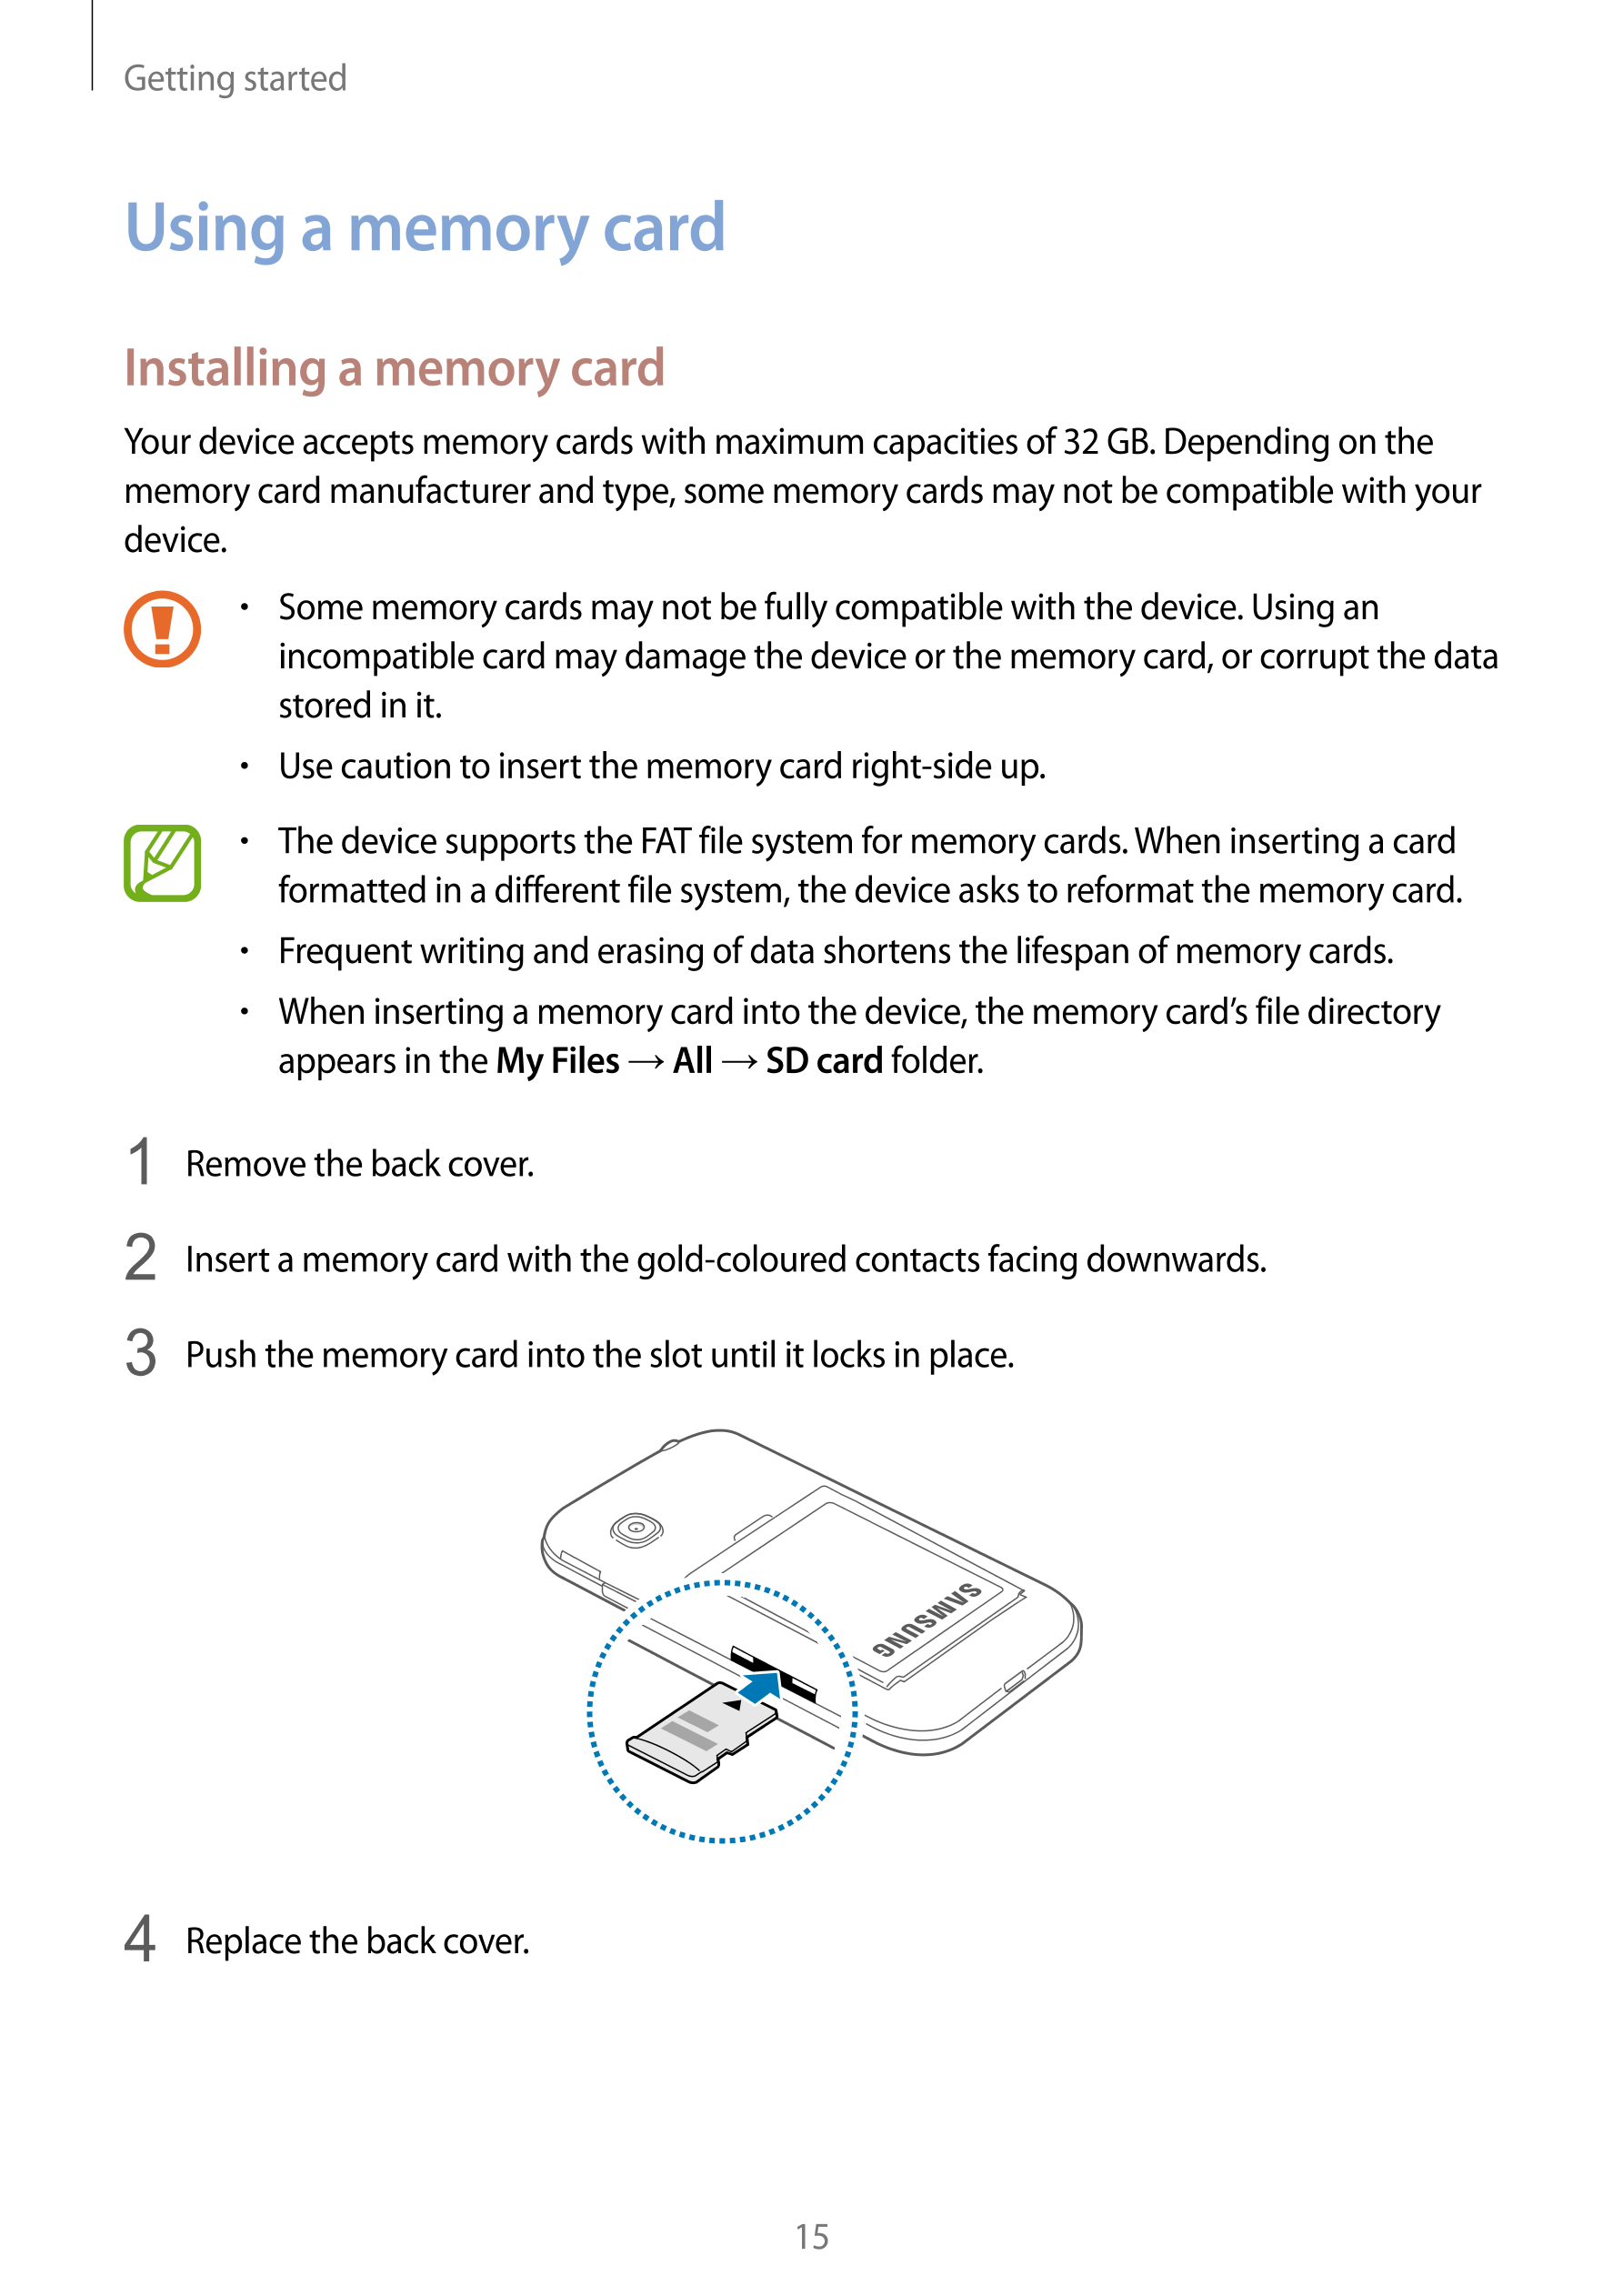 Getting started
Using a memory card
Installing a memory card
Your device accepts memory cards with maximum capacities of 32 GB. 